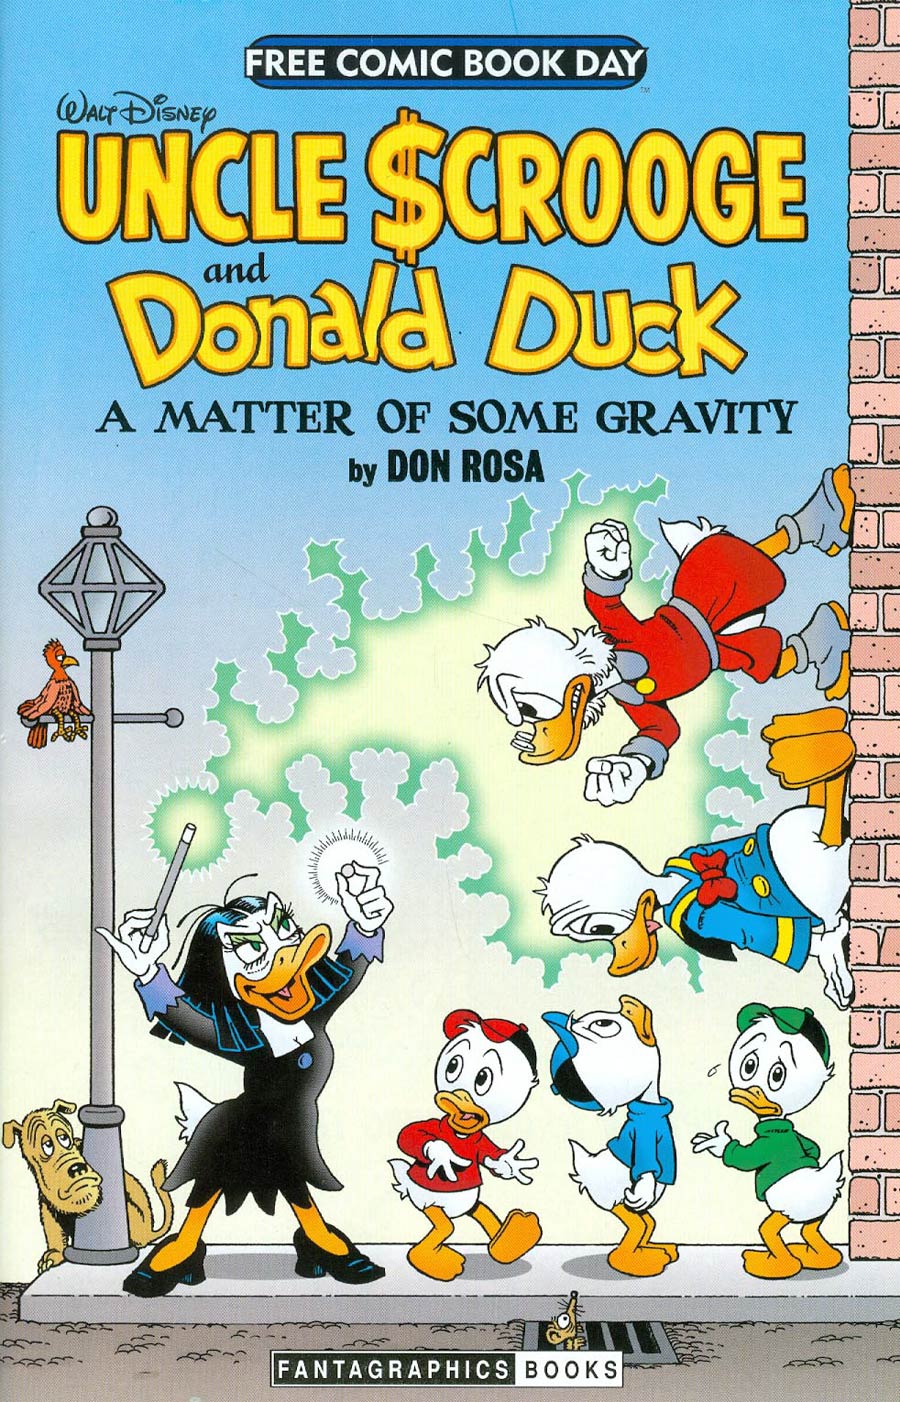 FCBD 2014 Uncle Scrooge & Donald Duck A Matter Of Some Gravity